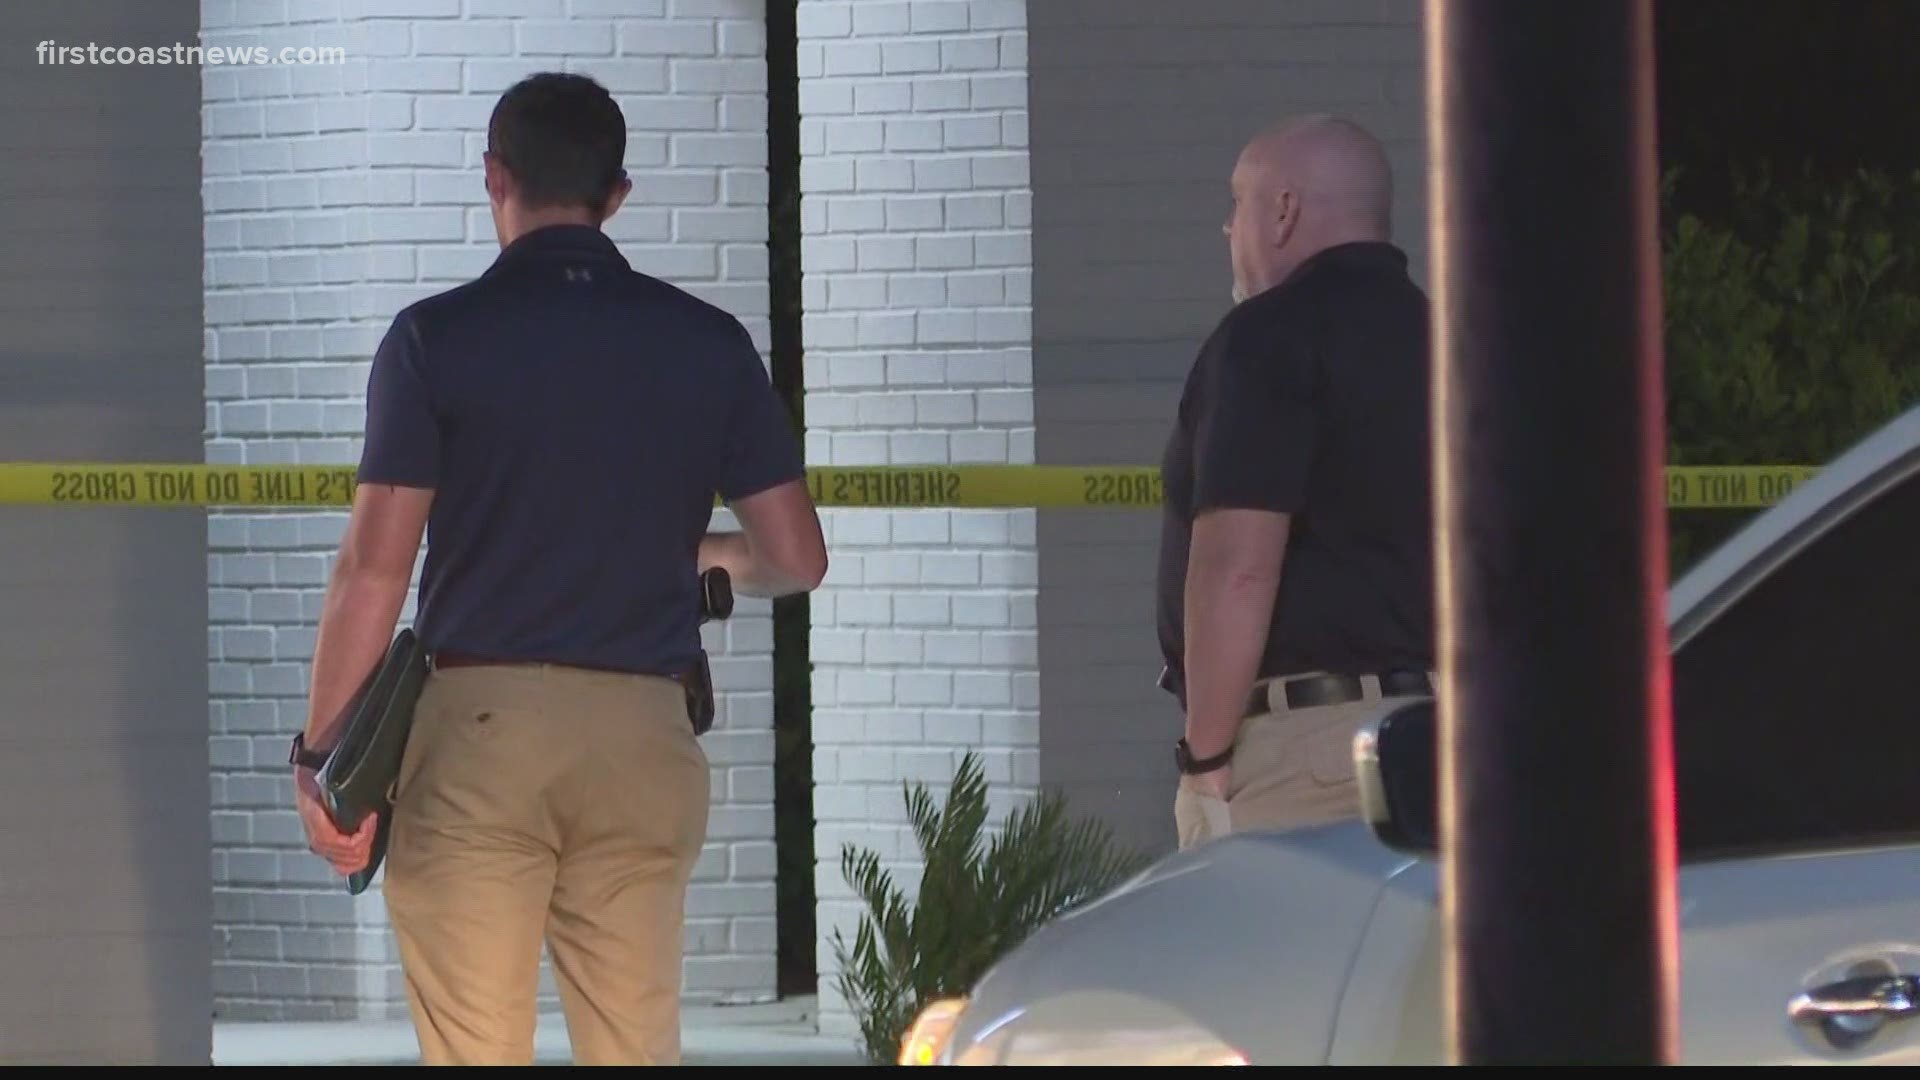 Deputies: Man airlifted to hospital after self-inflicted shooting at Shoppes of Ponte Vedra